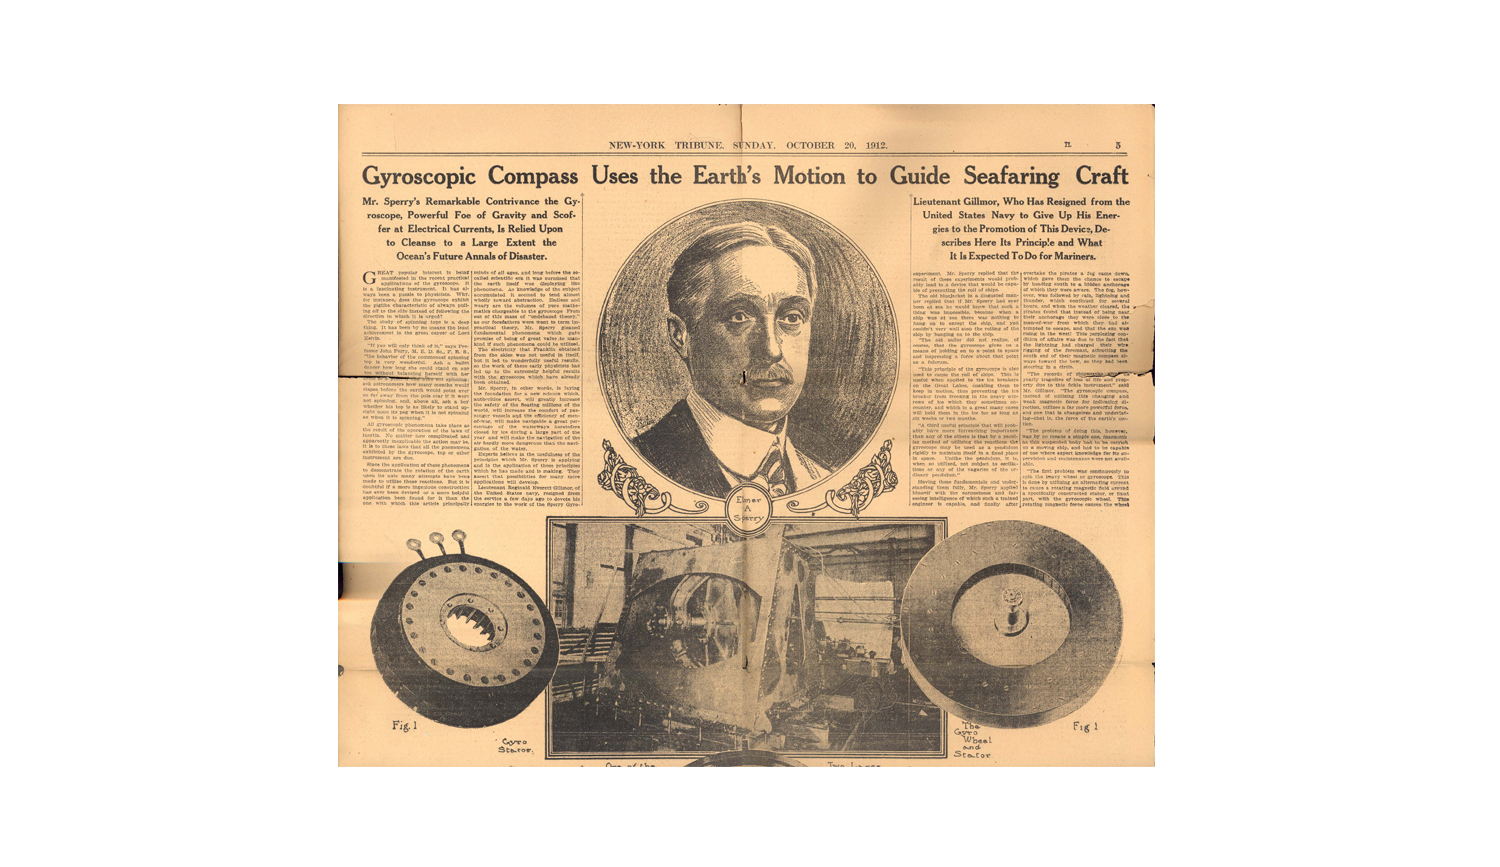 An old news article featuring Elmer A Sperry and his gyro-compass